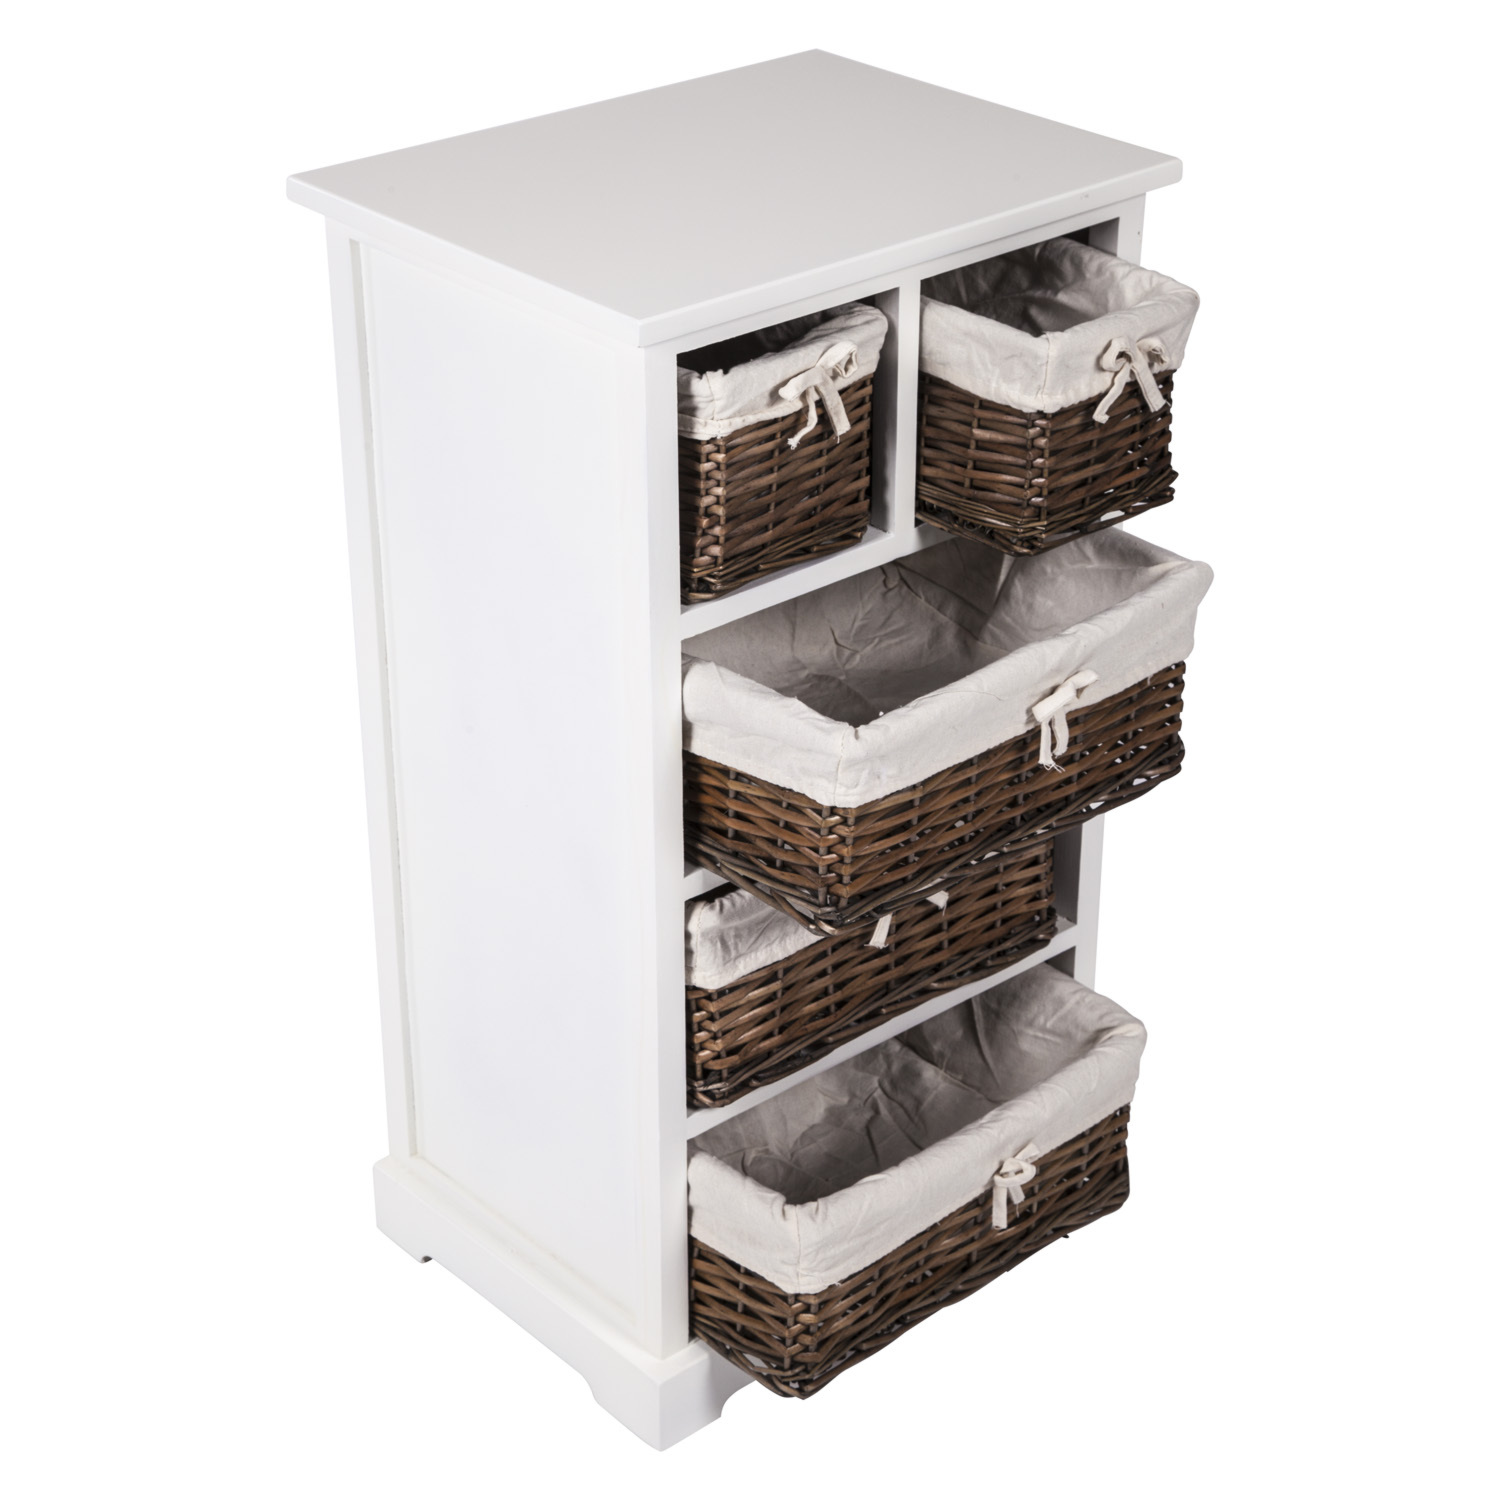 Buttermere Basket Chest - White Image 3